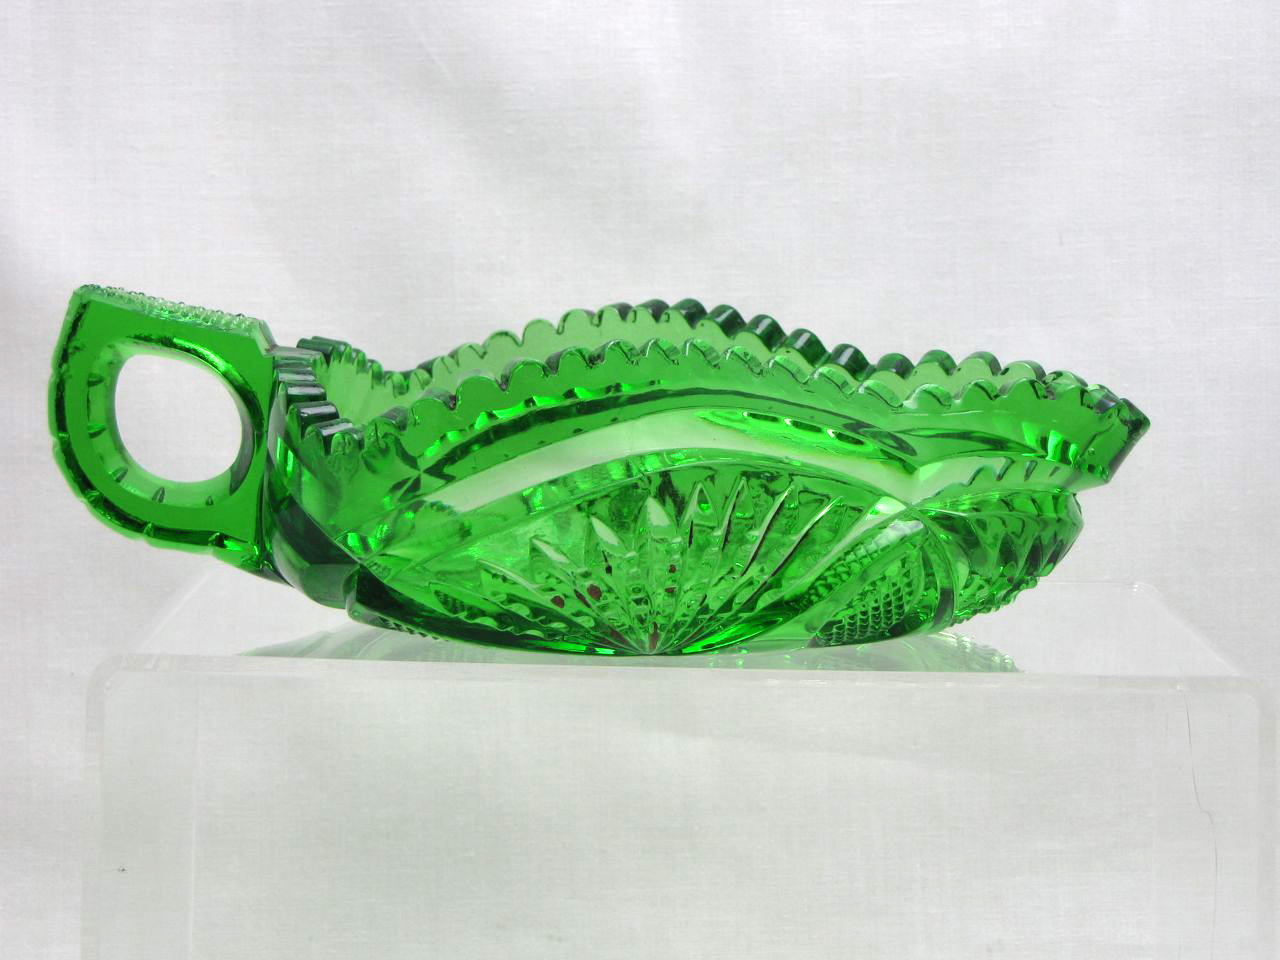 Heisey #1255 Pineapple and Fan, Handled Jelly, Emerald, 1898-1902